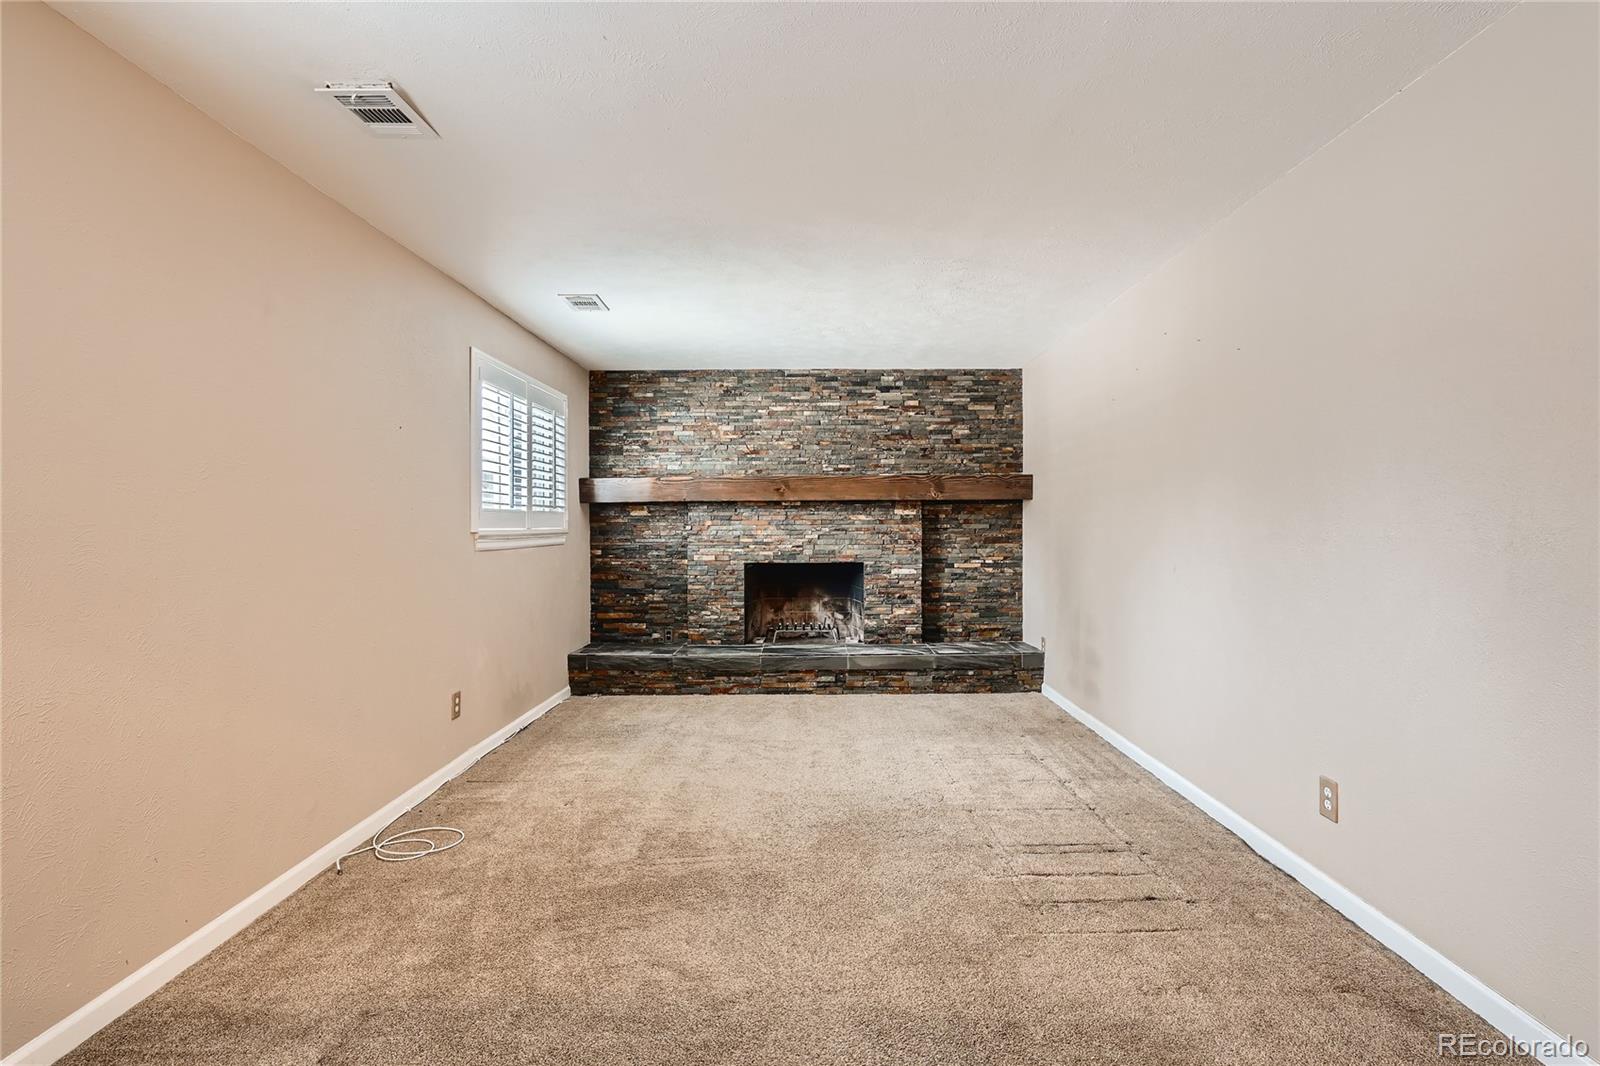 6321 108th, Westminster, CO